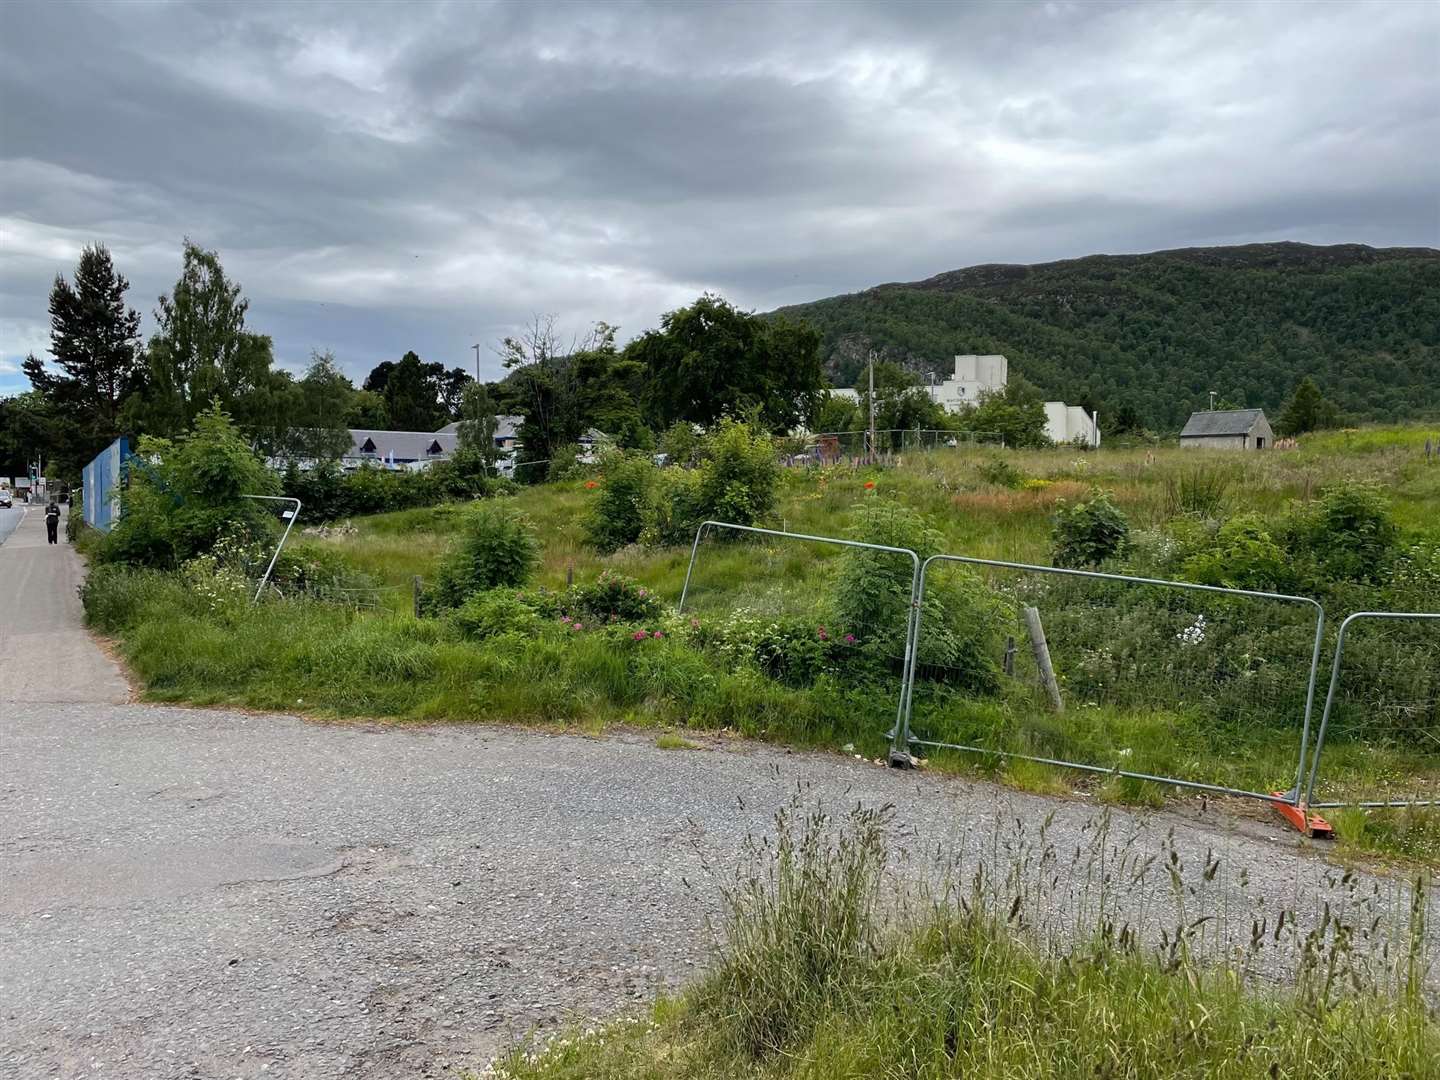 The site for the proposed development in the heart of Aviemore was rejected.